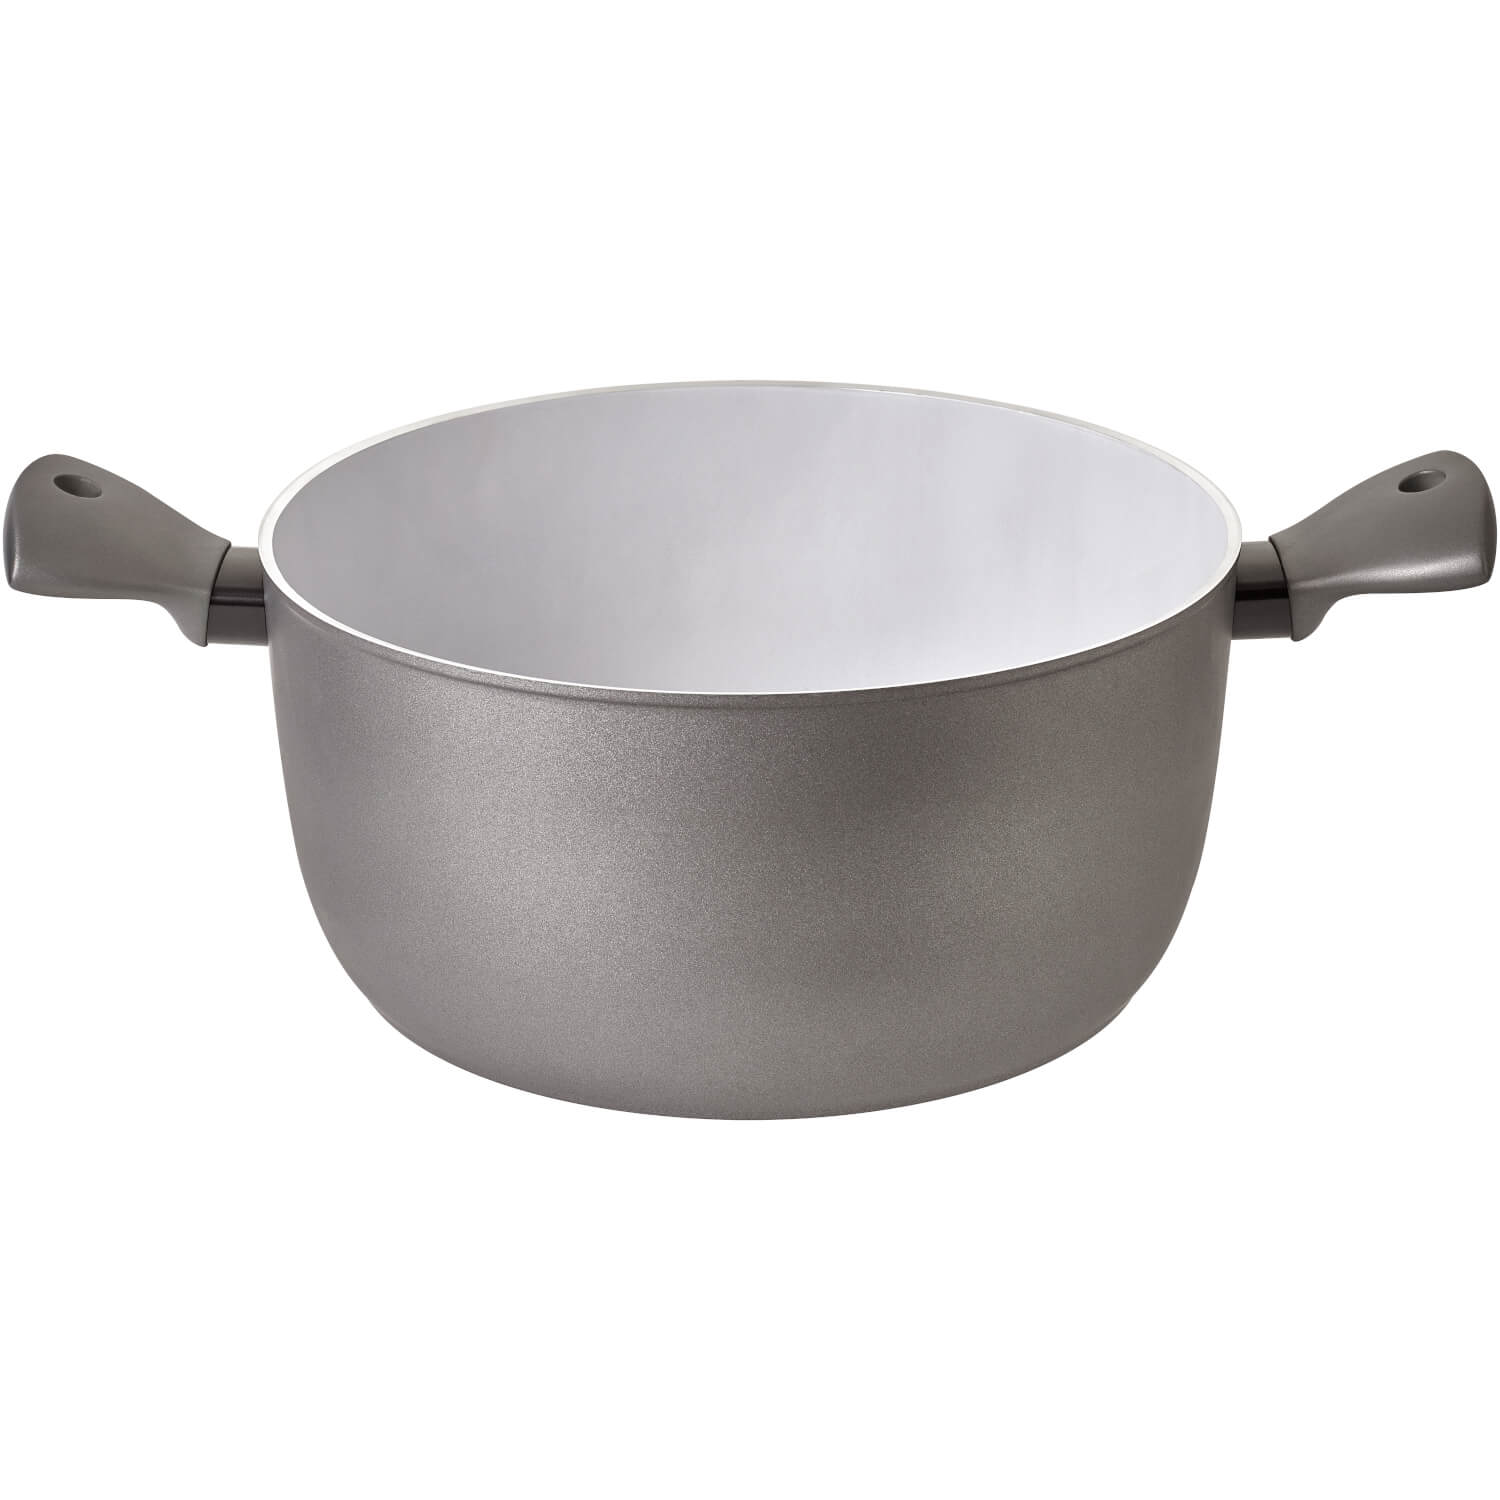 Shaws Department Stores Earth Pan Stockpot - 7.5L 1 Shaws Department Stores